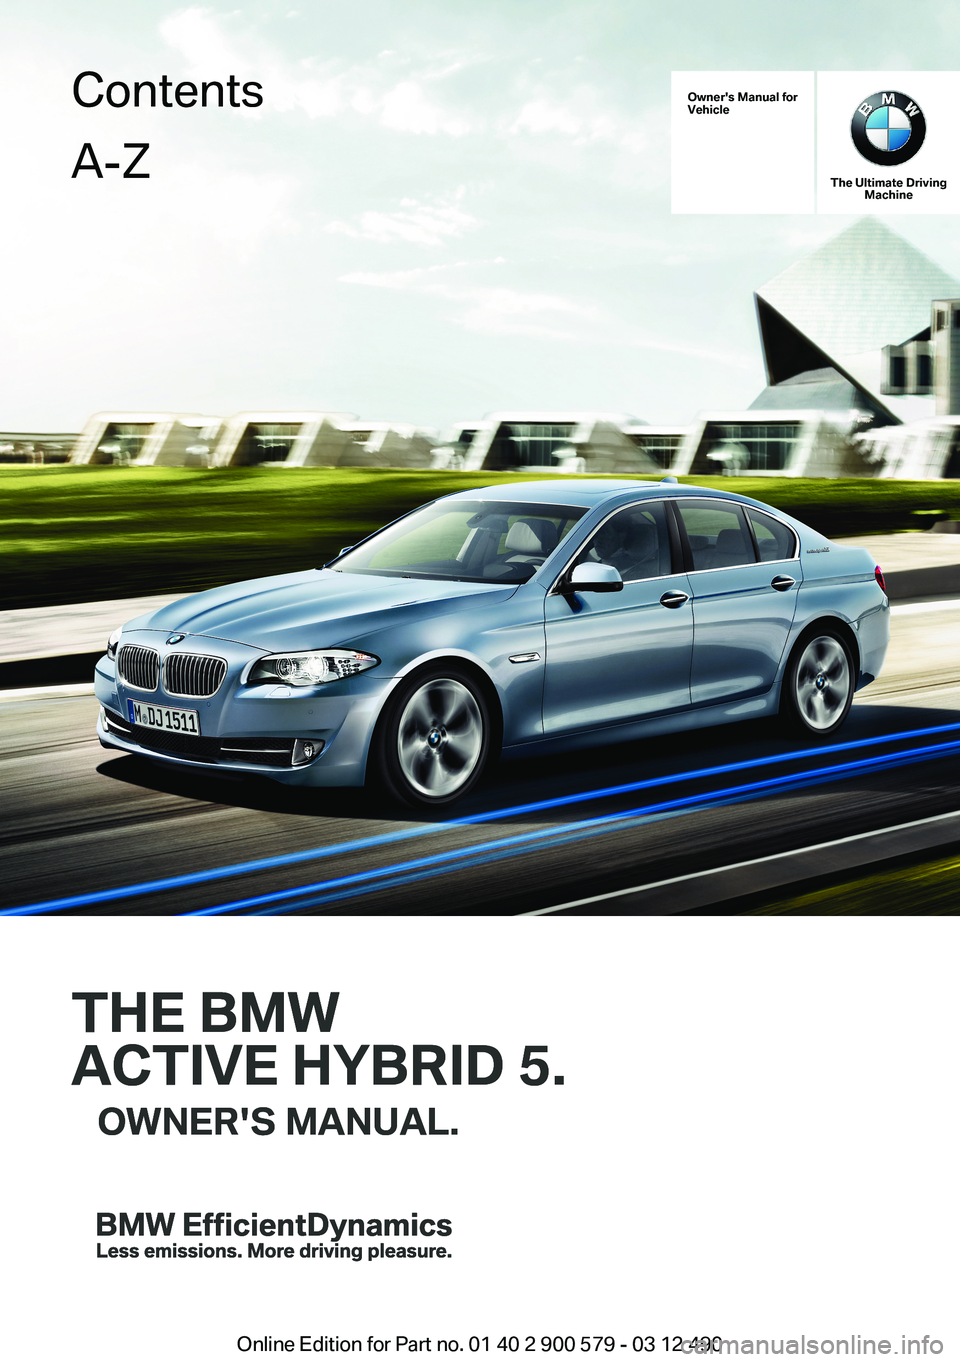 BMW ACTIVEHYBRID 5 2012  Owners Manual Owner's Manual forVehicle
THE BMW
ACTIVE HYBRID 5.
OWNER'S MANUAL.
The Ultimate DrivingMachine
THE BMW
ACTIVE HYBRID 5.
OWNER'S MANUAL.
ContentsA-Z
Online Edition for Part no. 01 40 2 900 